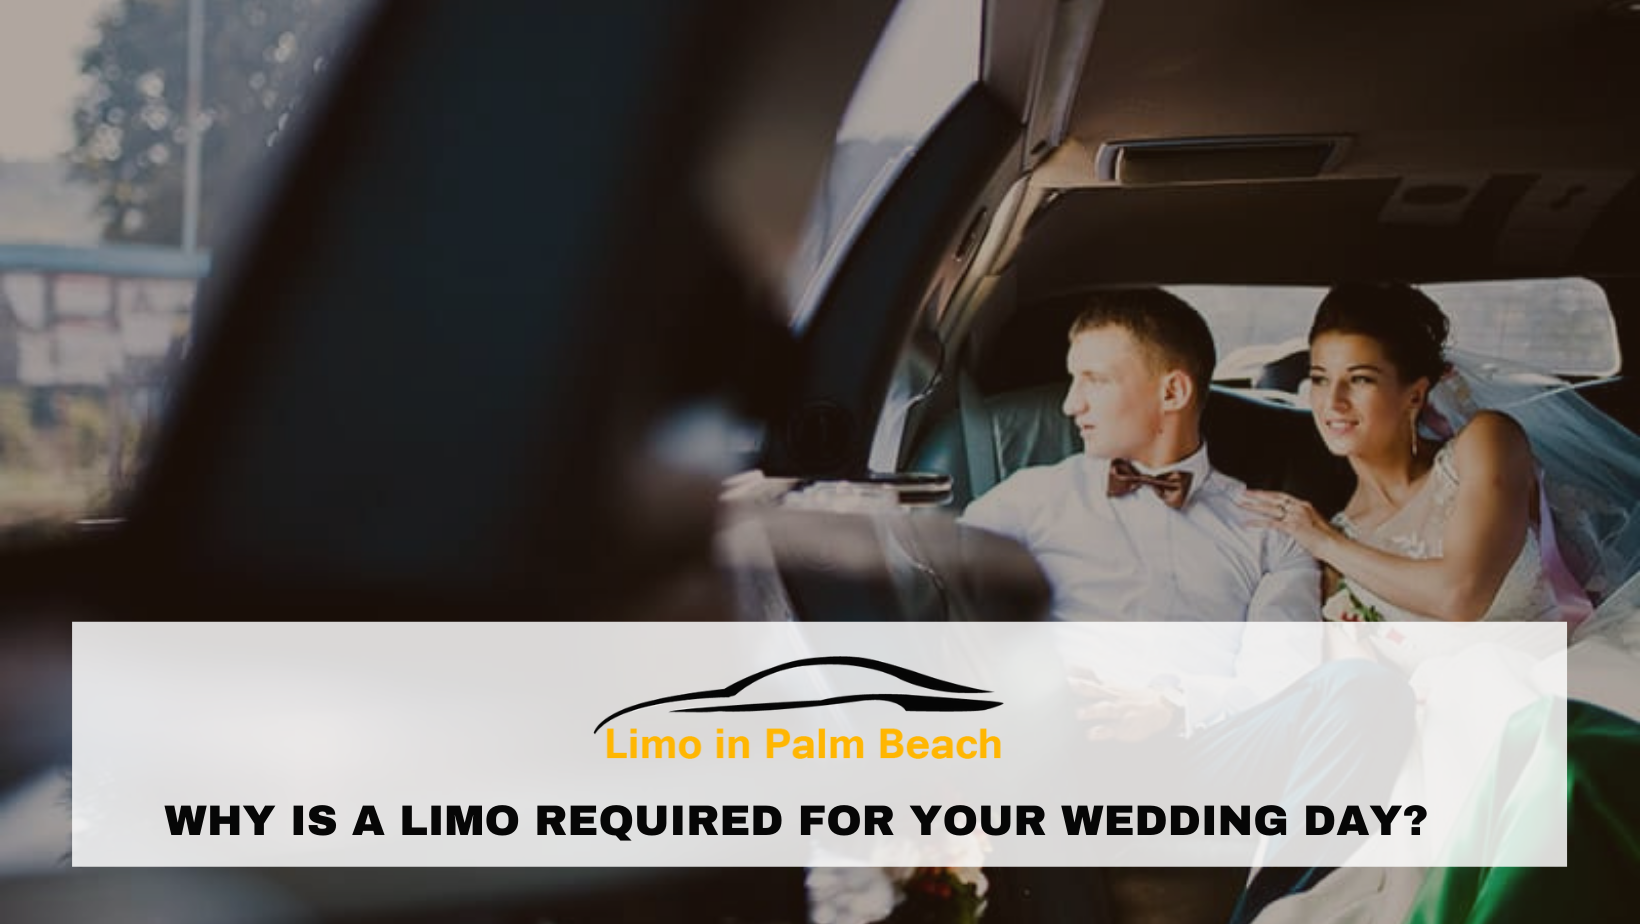 WHY IS A LIMO REQUIRED FOR YOUR WEDDING DAY?